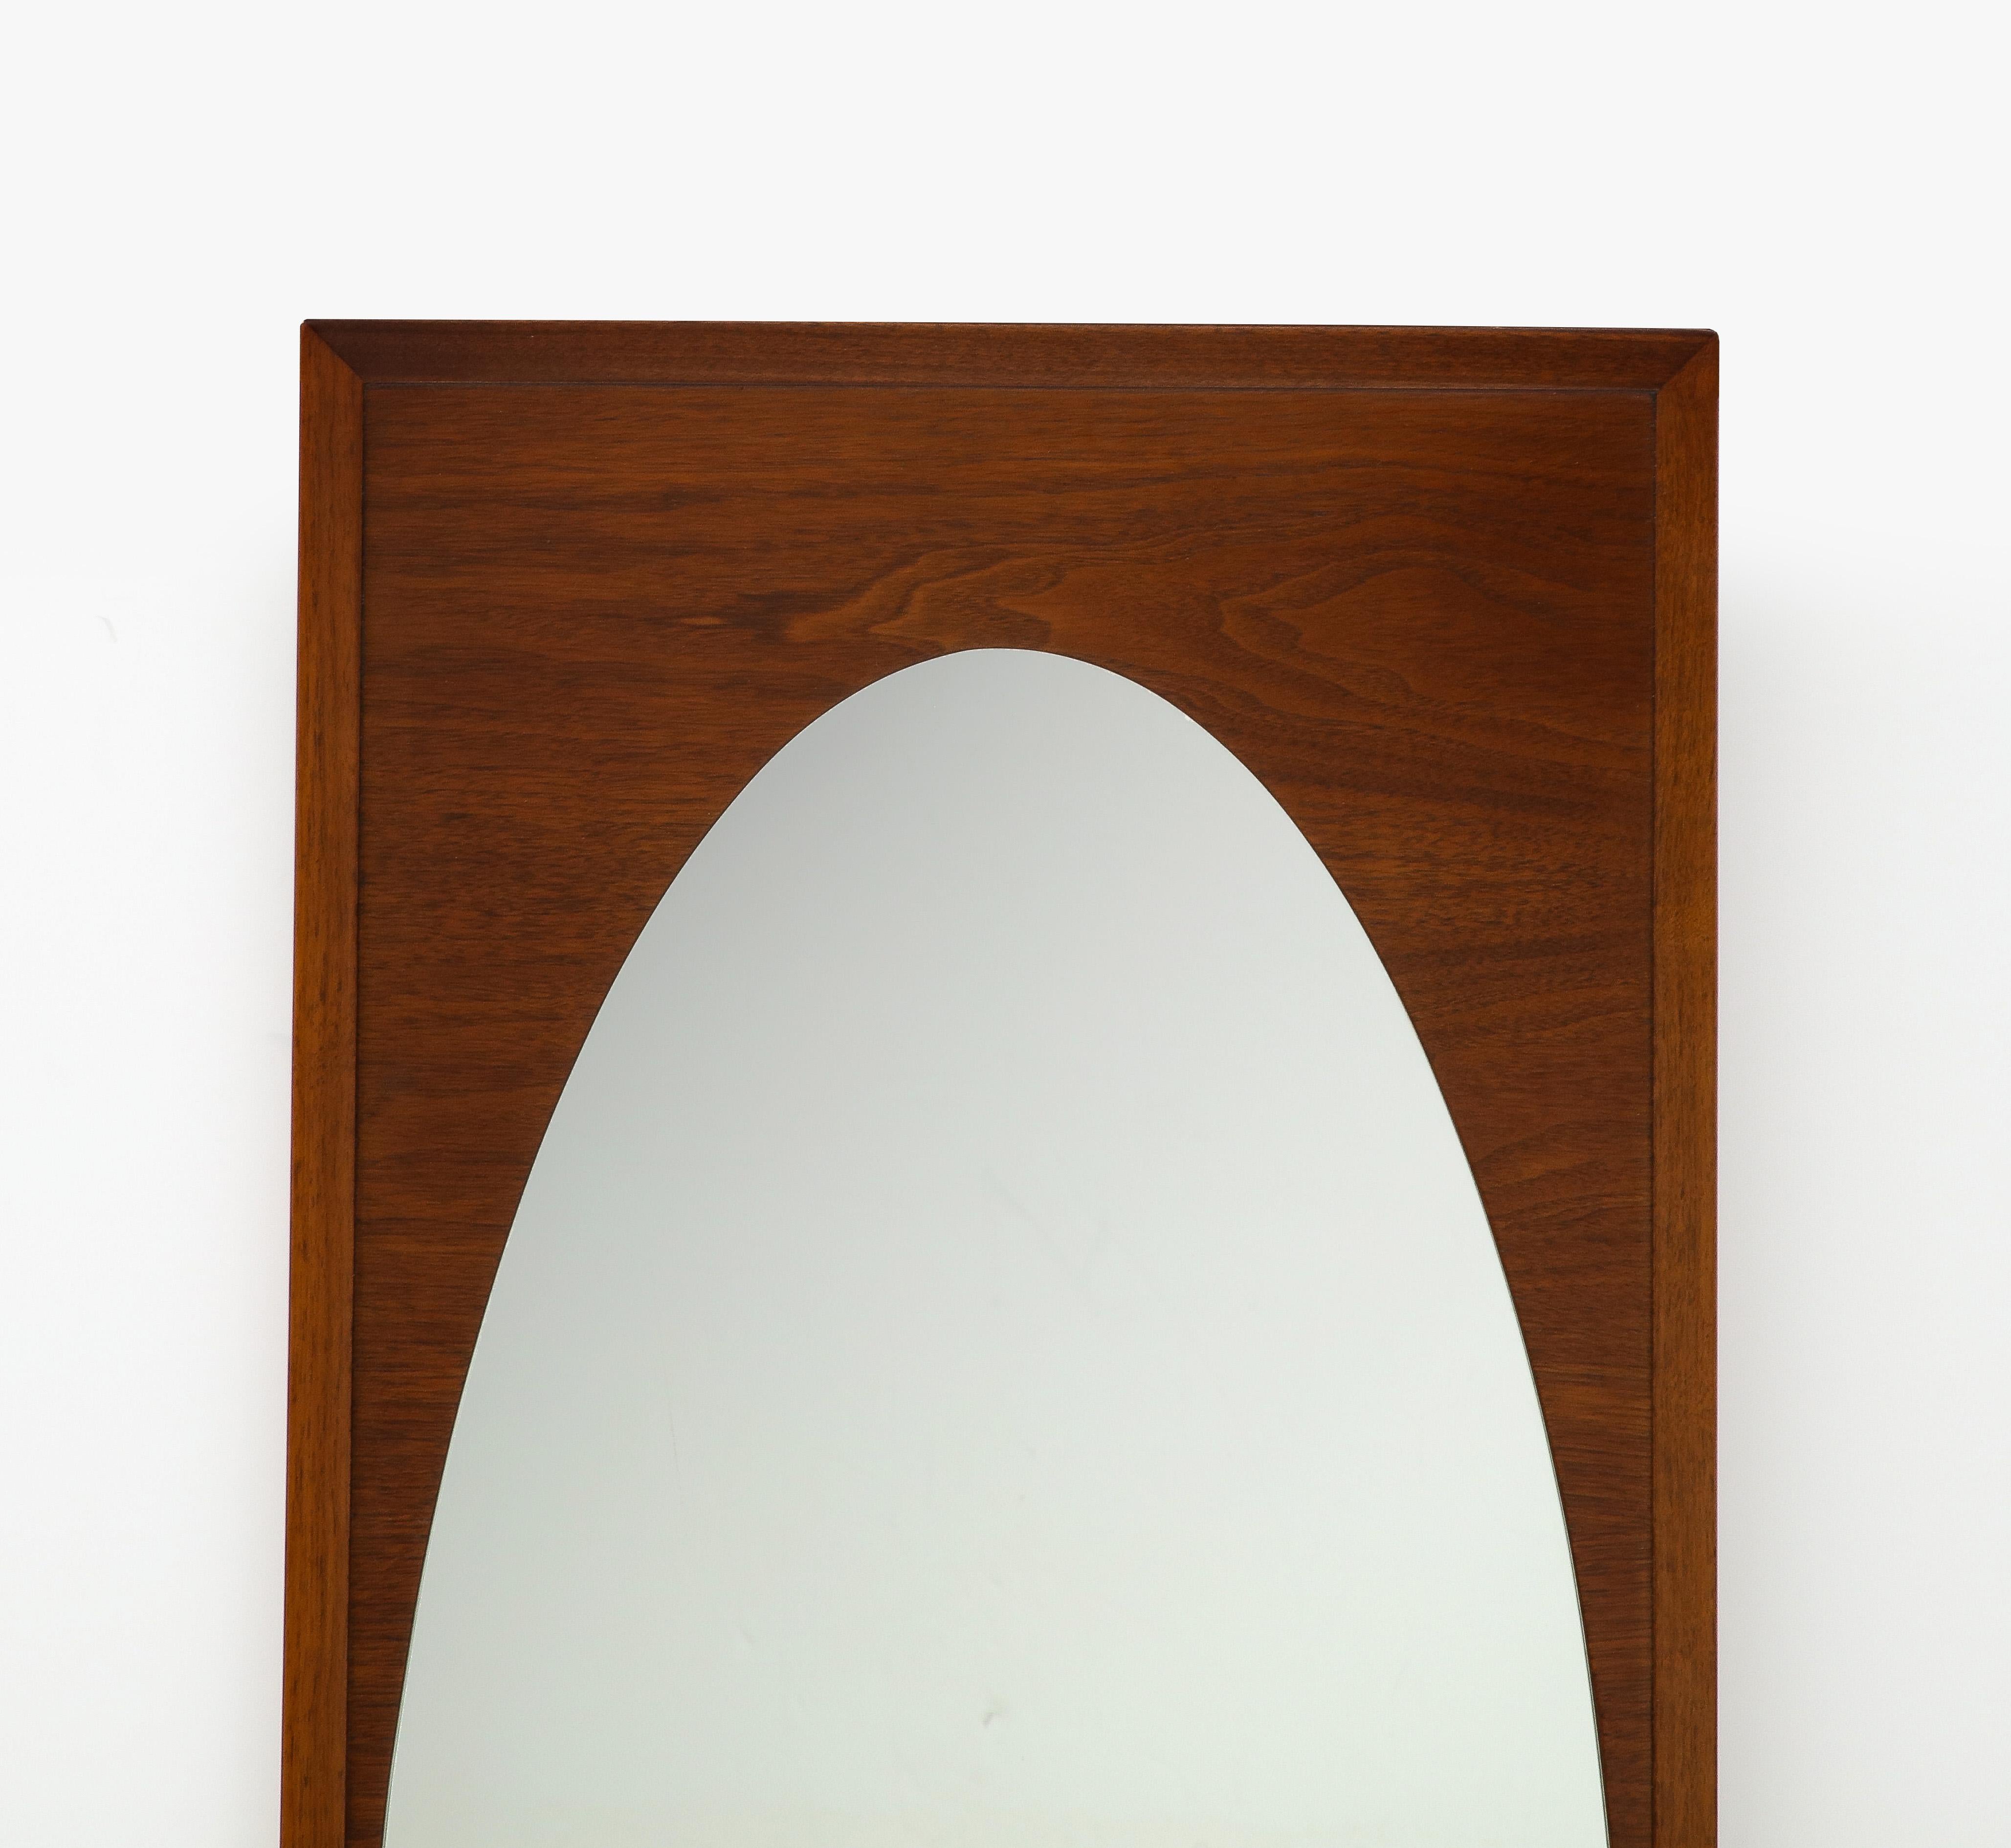 Beautiful 1960's modernist walnut frame with Elliptical oval mirror designed by Harvey Probber, in very good vintage condition, lightly restored with minor wear and patina due to age and use.